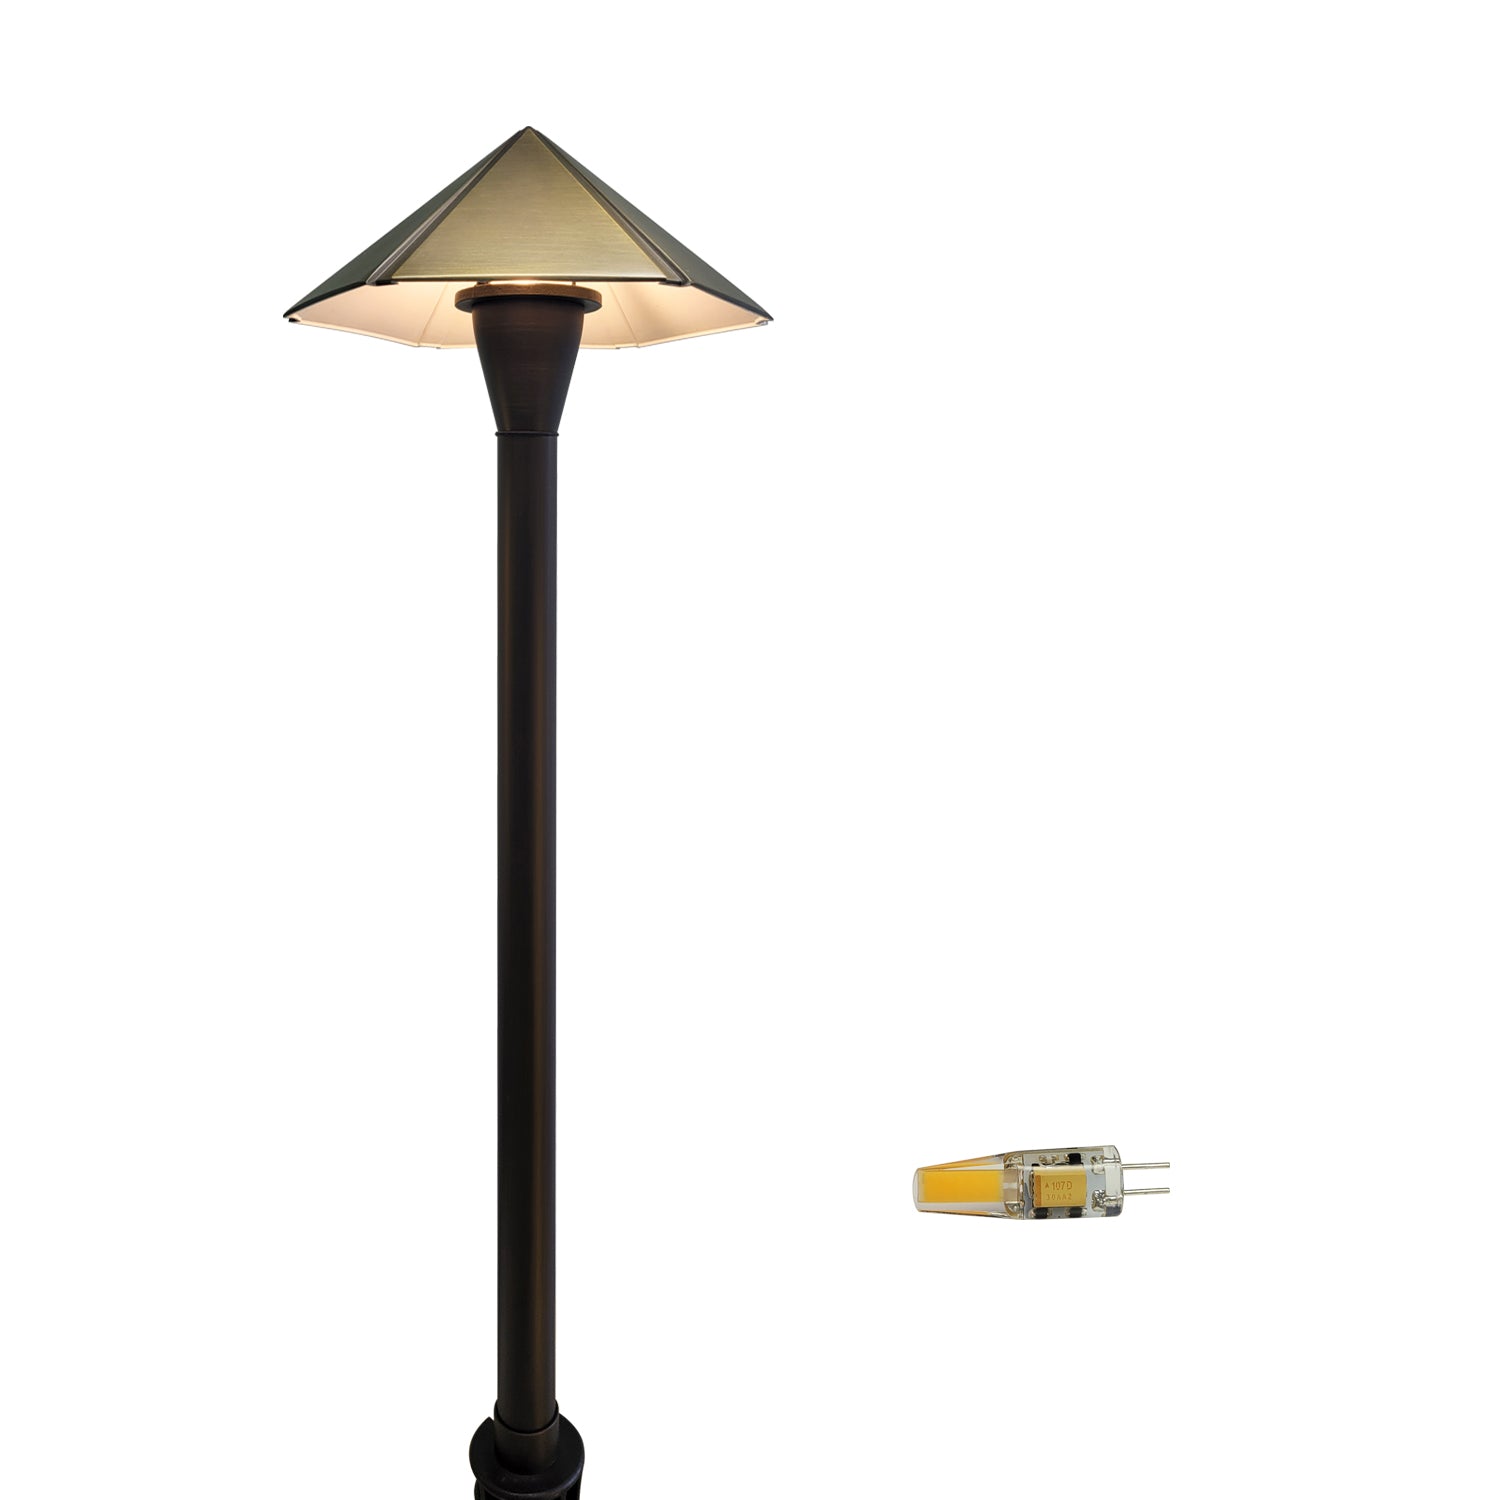 Brass 12V low voltage pathway light for landscapes with included driveway lighting bulb model COP605B